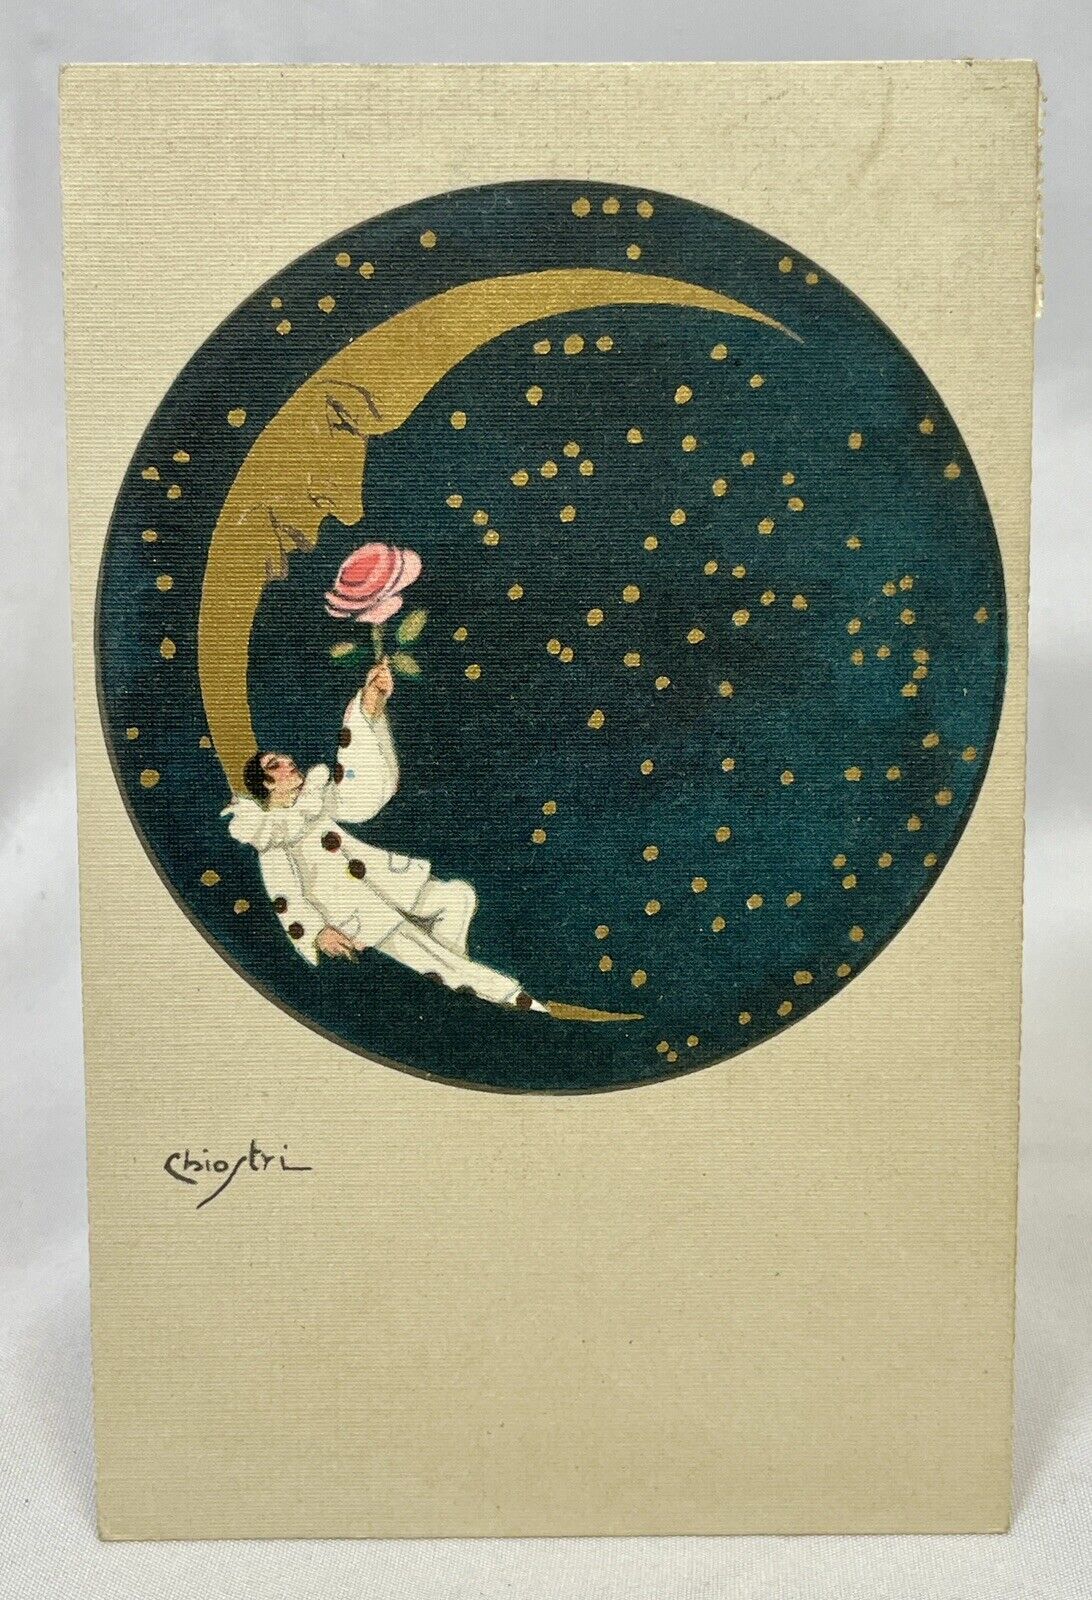 Italian Artist Sofia Chiostri | Pierrot Laying On The Moon w/ Rose | 1900